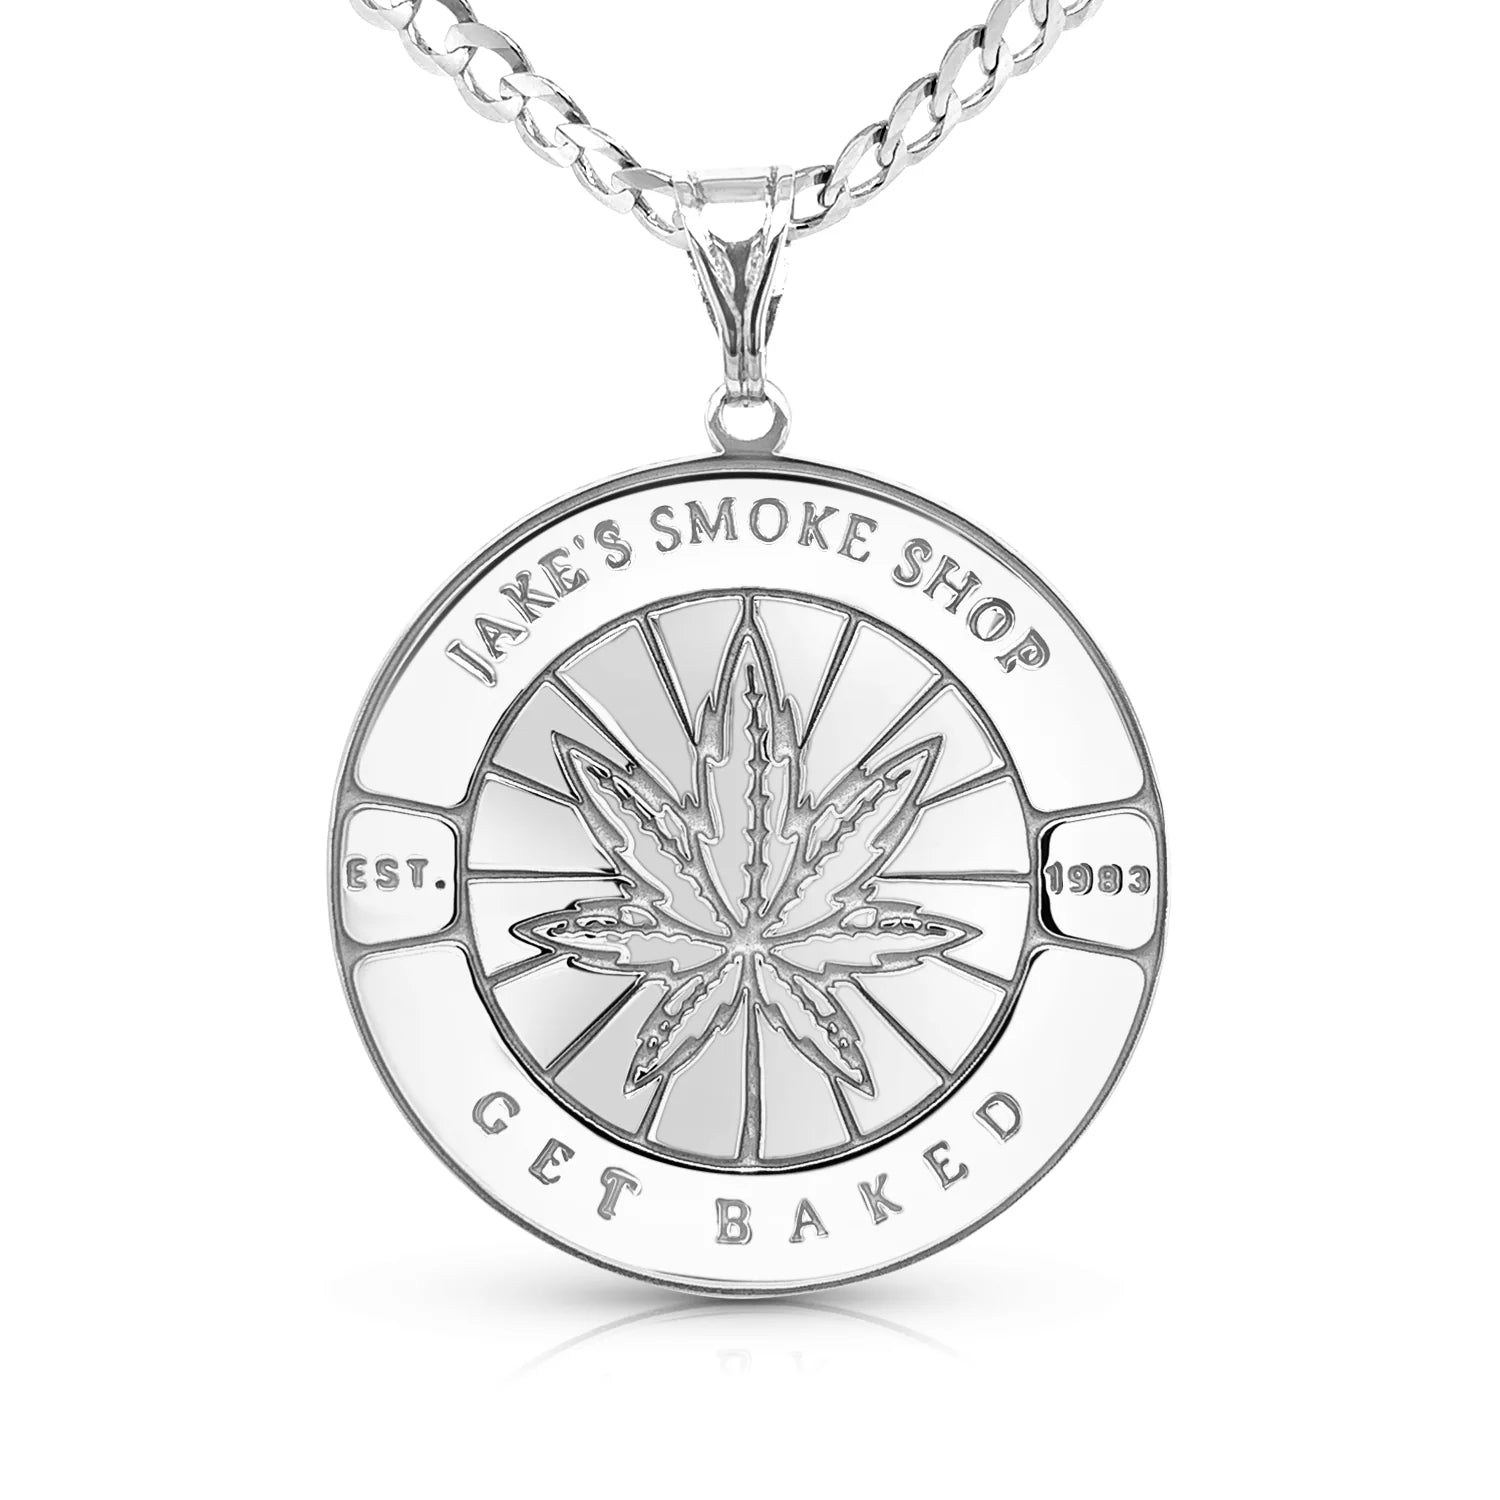 Silver pendant of a smoke shops brand on a white background